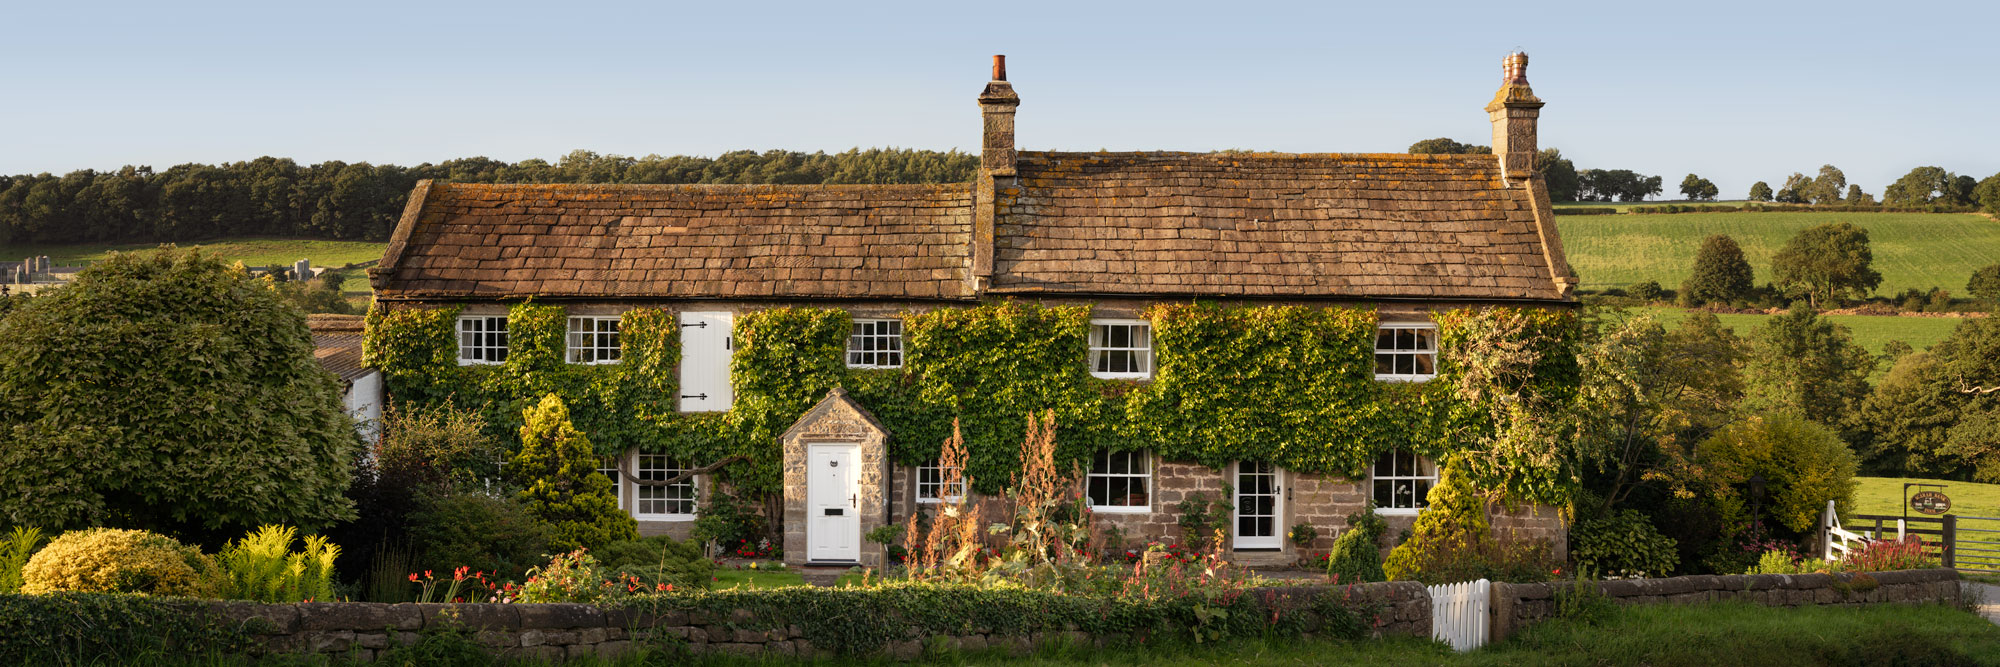 Panorama of an English British farmhouse in Yorkshire